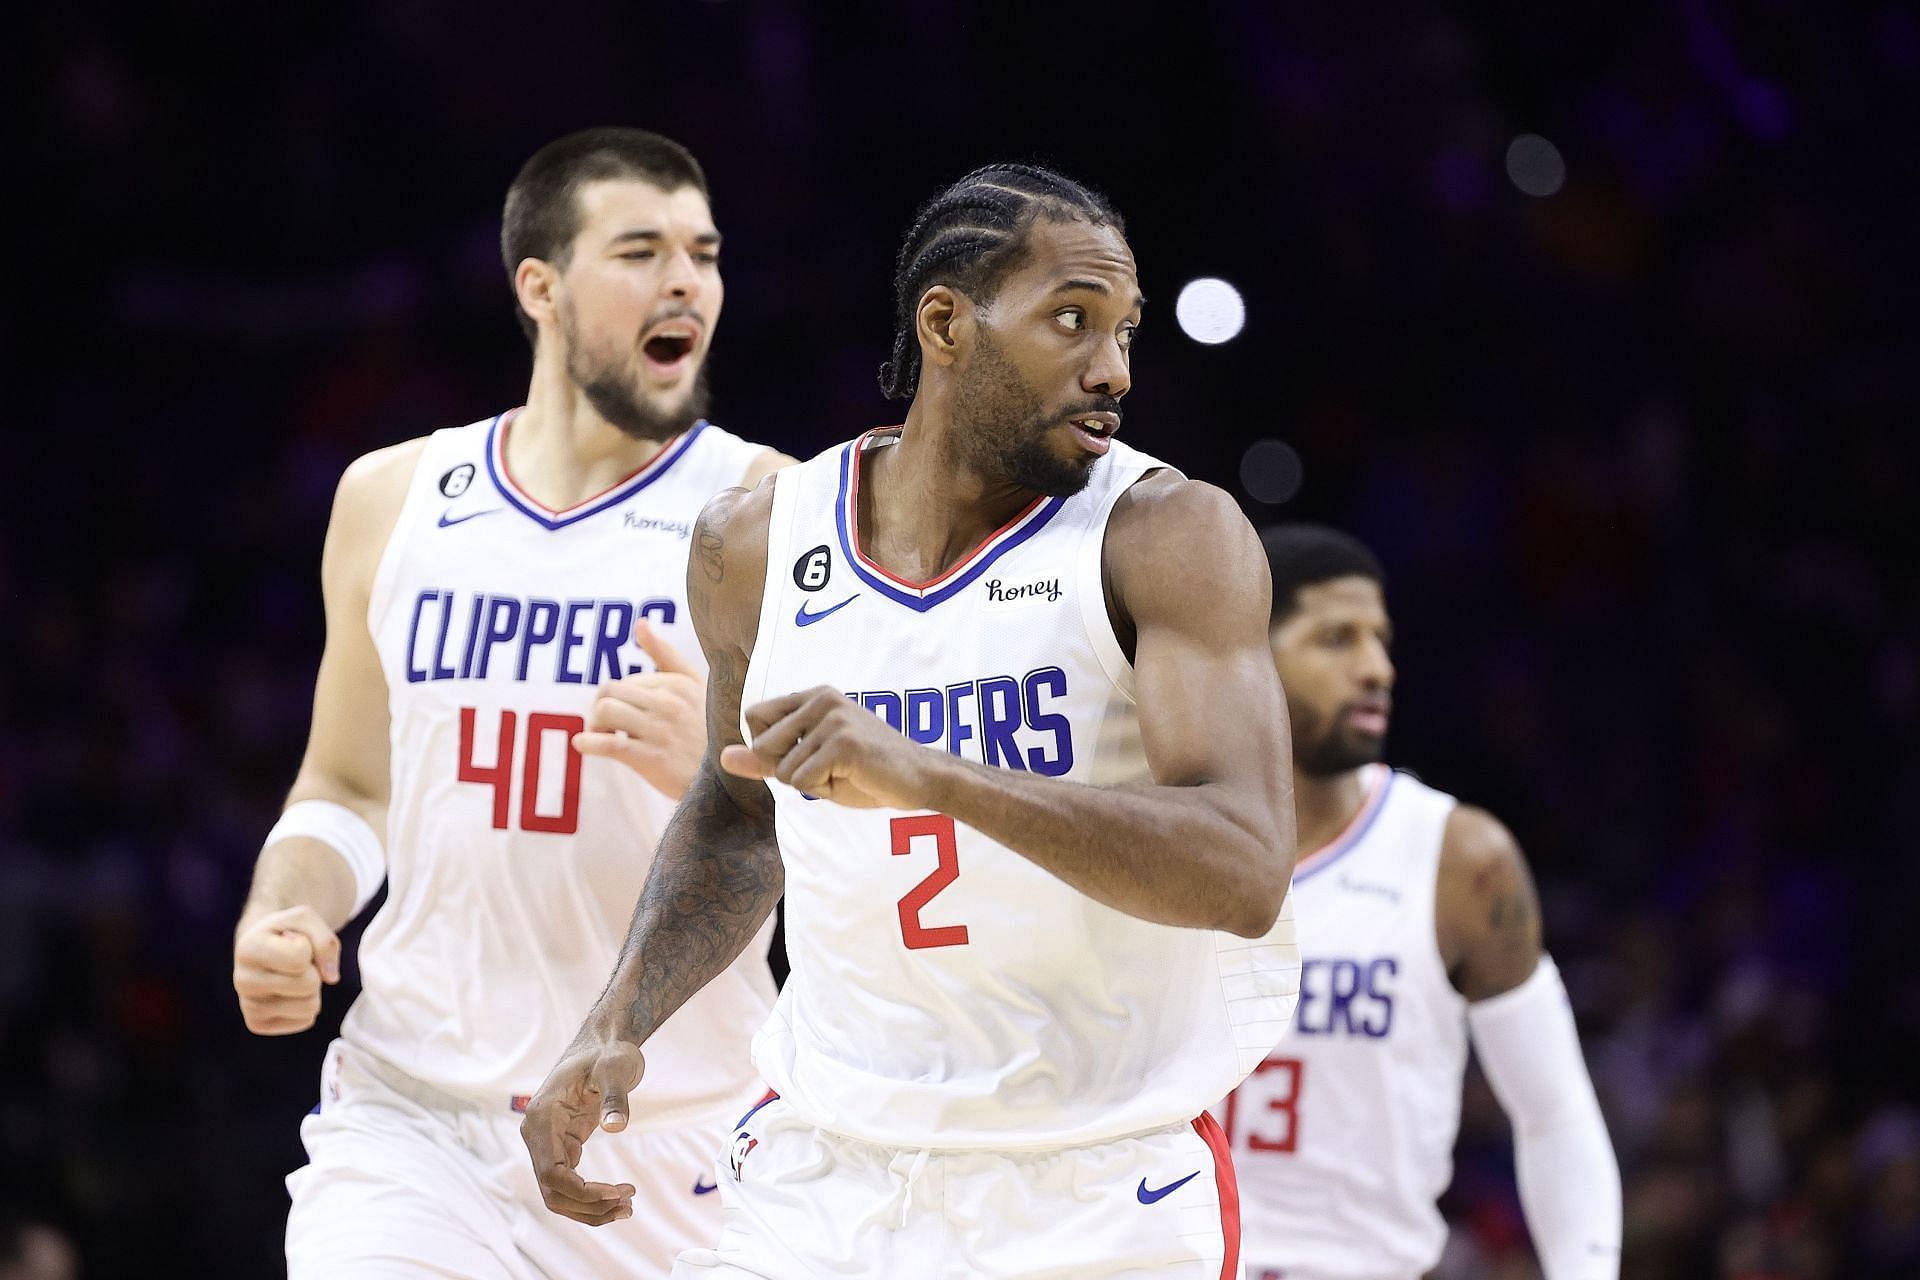 Fans react to the Clippers losing to the Sixers